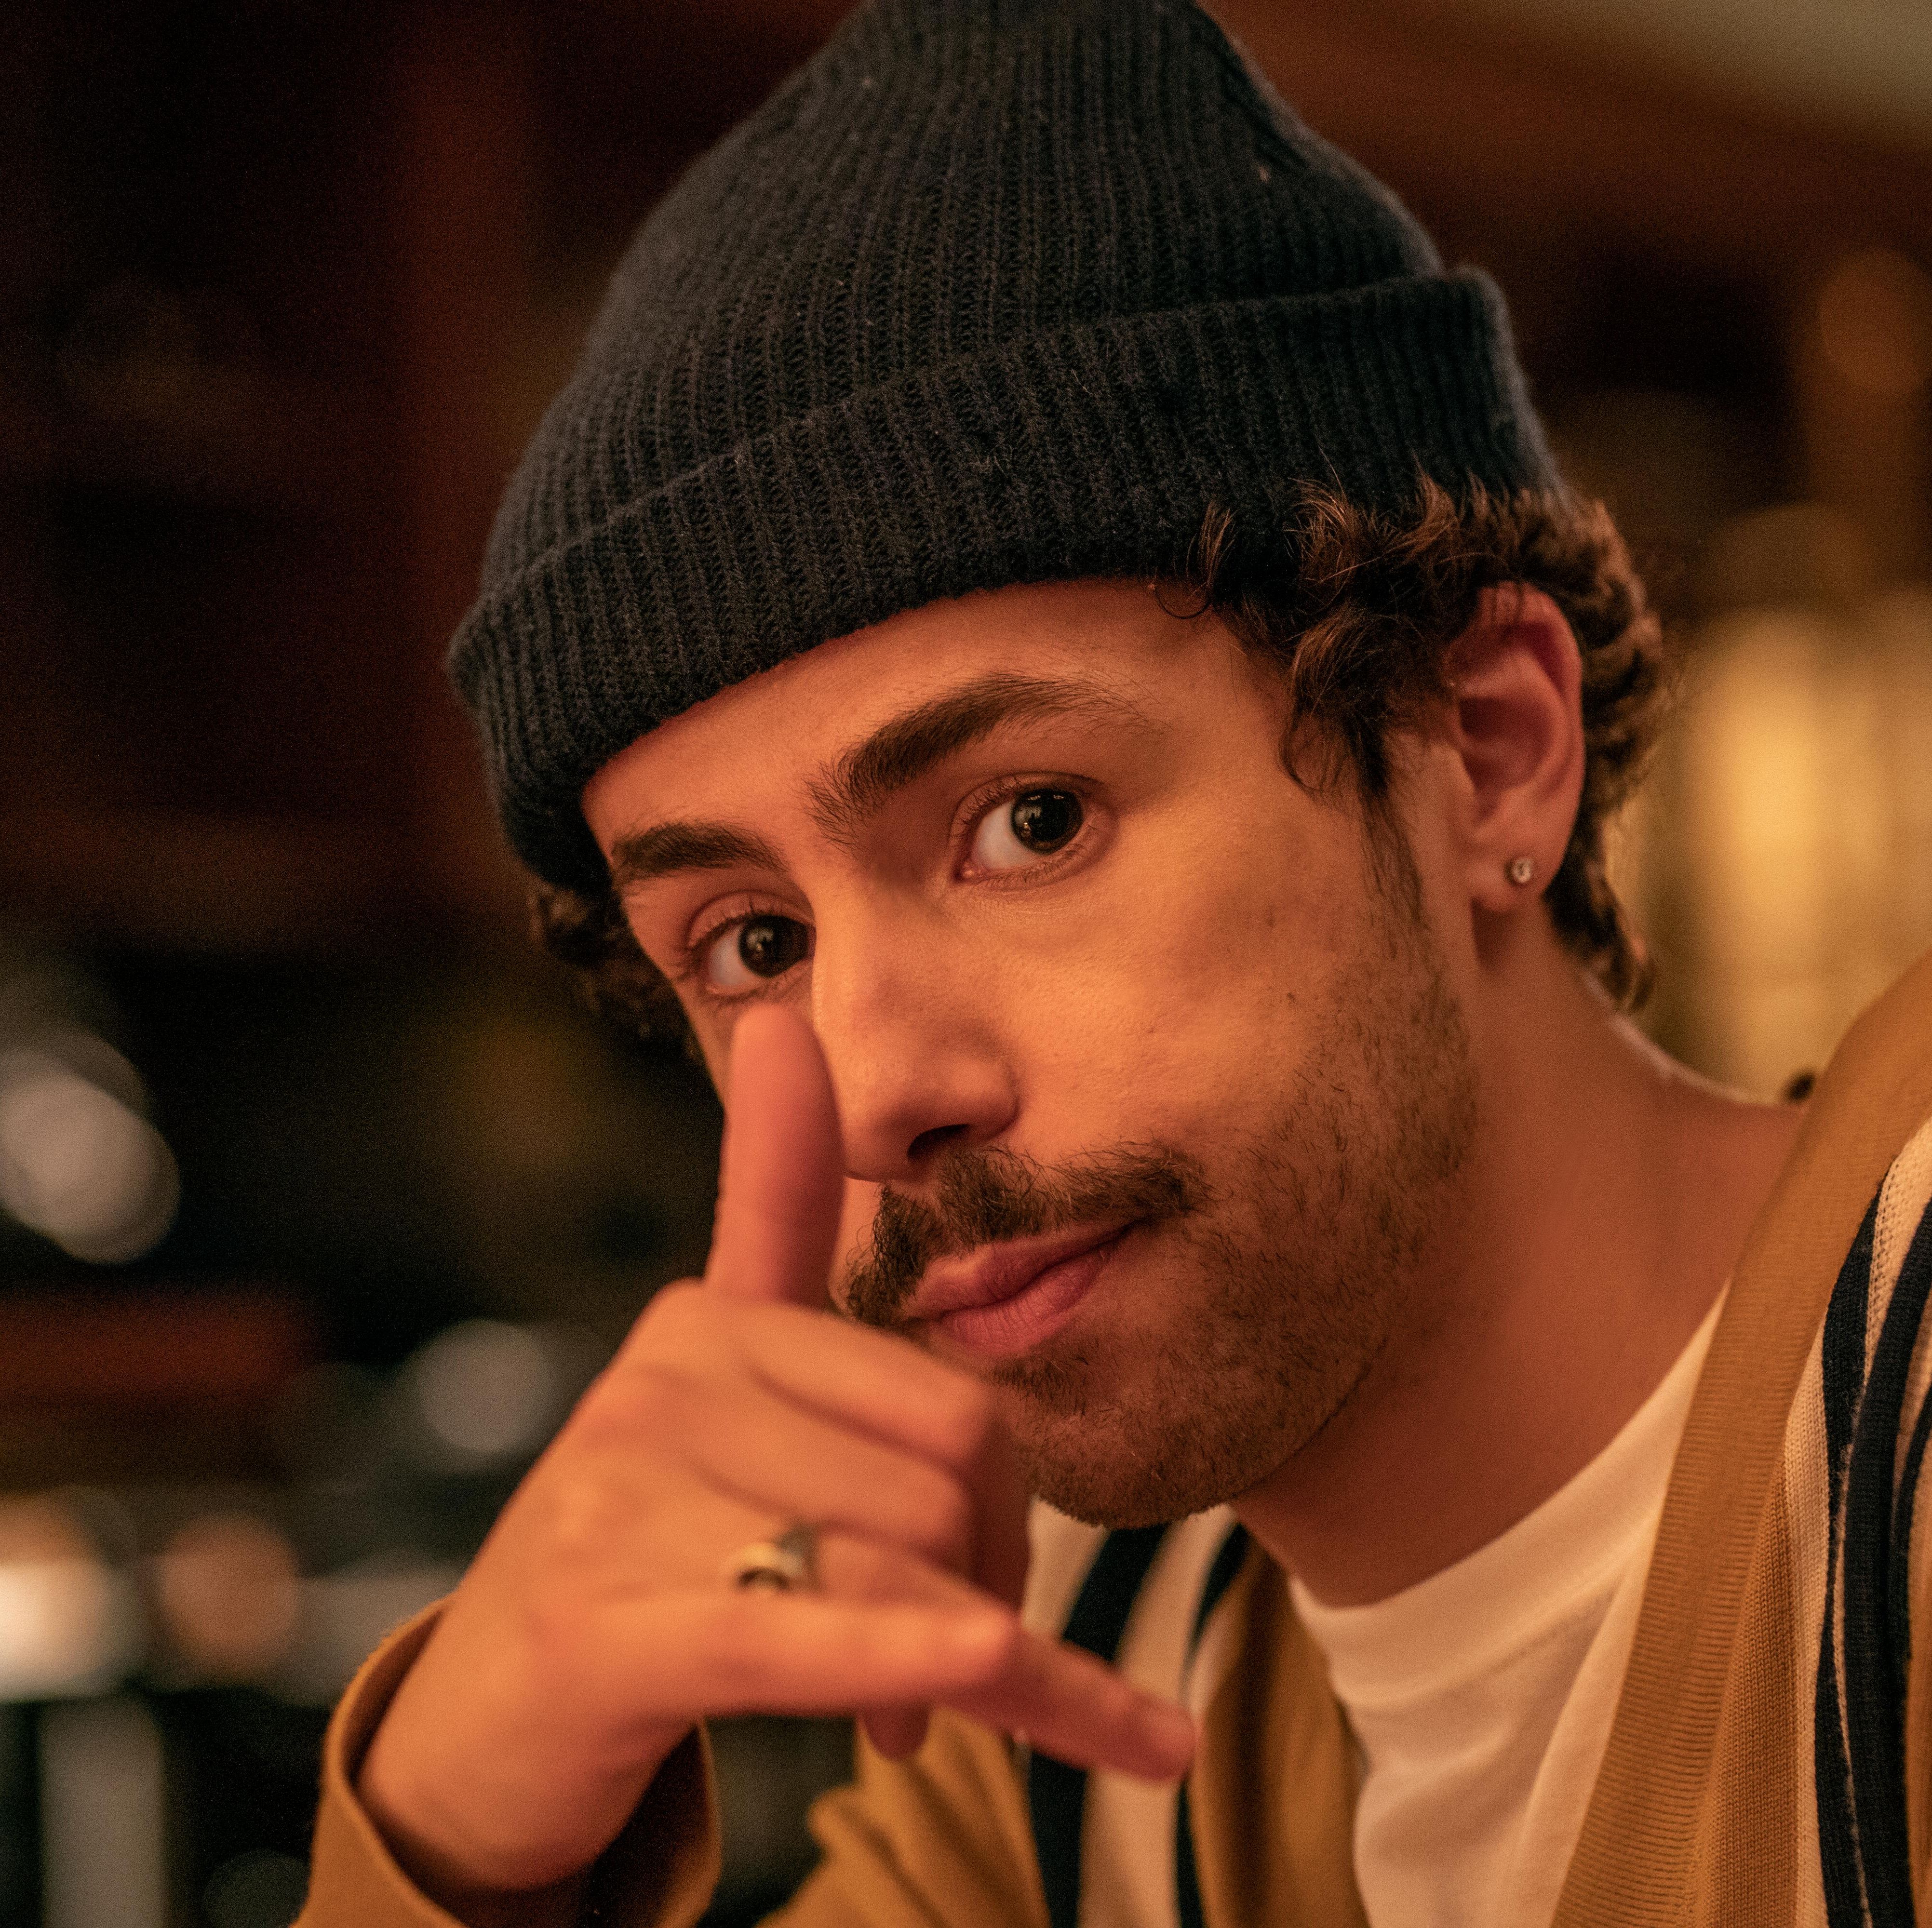 The star and showrunner talks season 3 of Ramy, tackling difficult conversations, and why his characters strike “real nerves.”